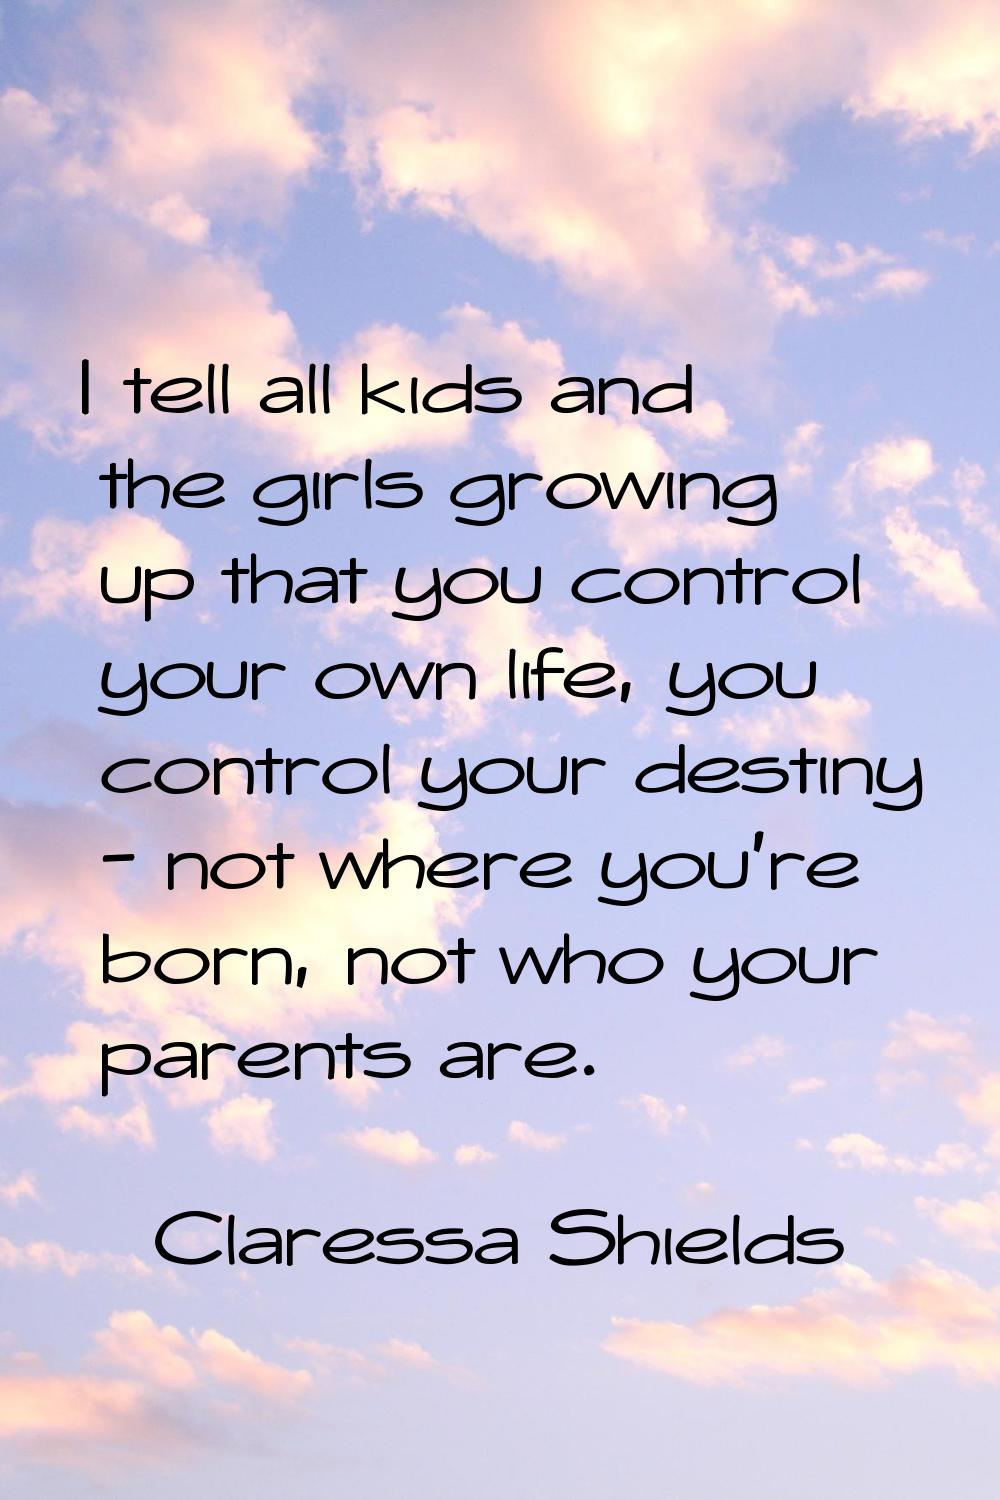 I tell all kids and the girls growing up that you control your own life, you control your destiny -